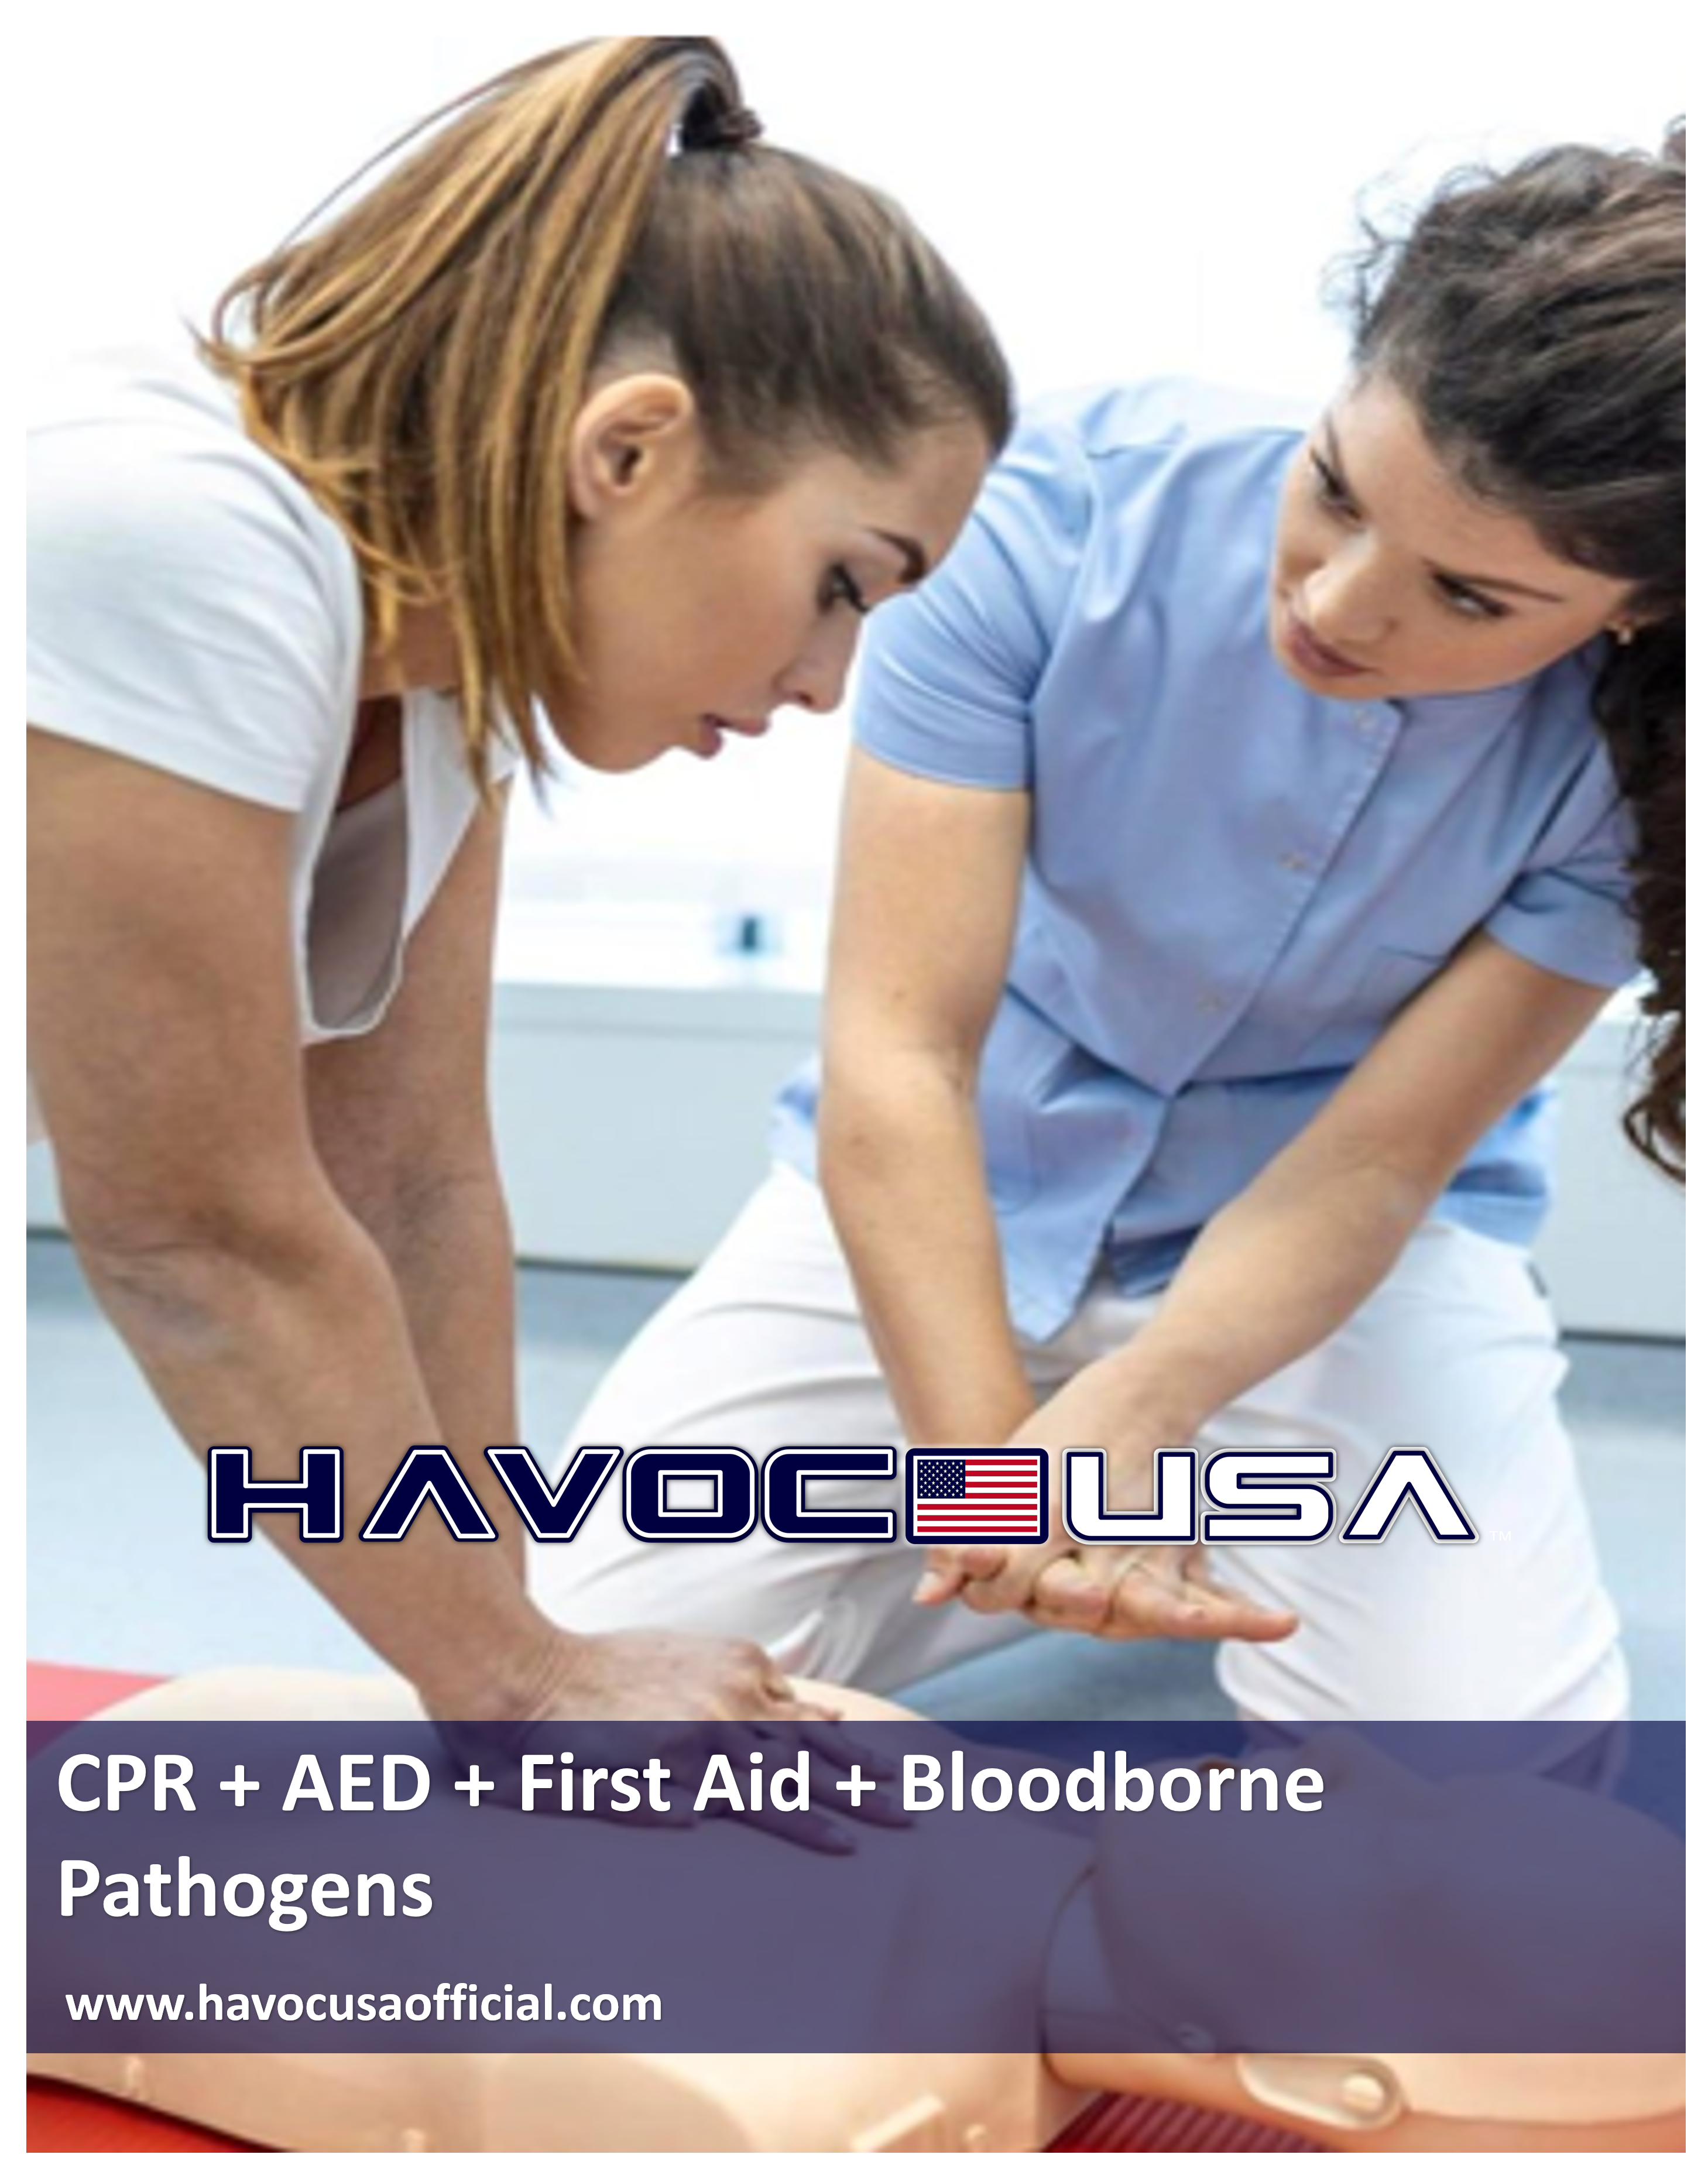 CPR, AED, and First Aid by HAVOC USA